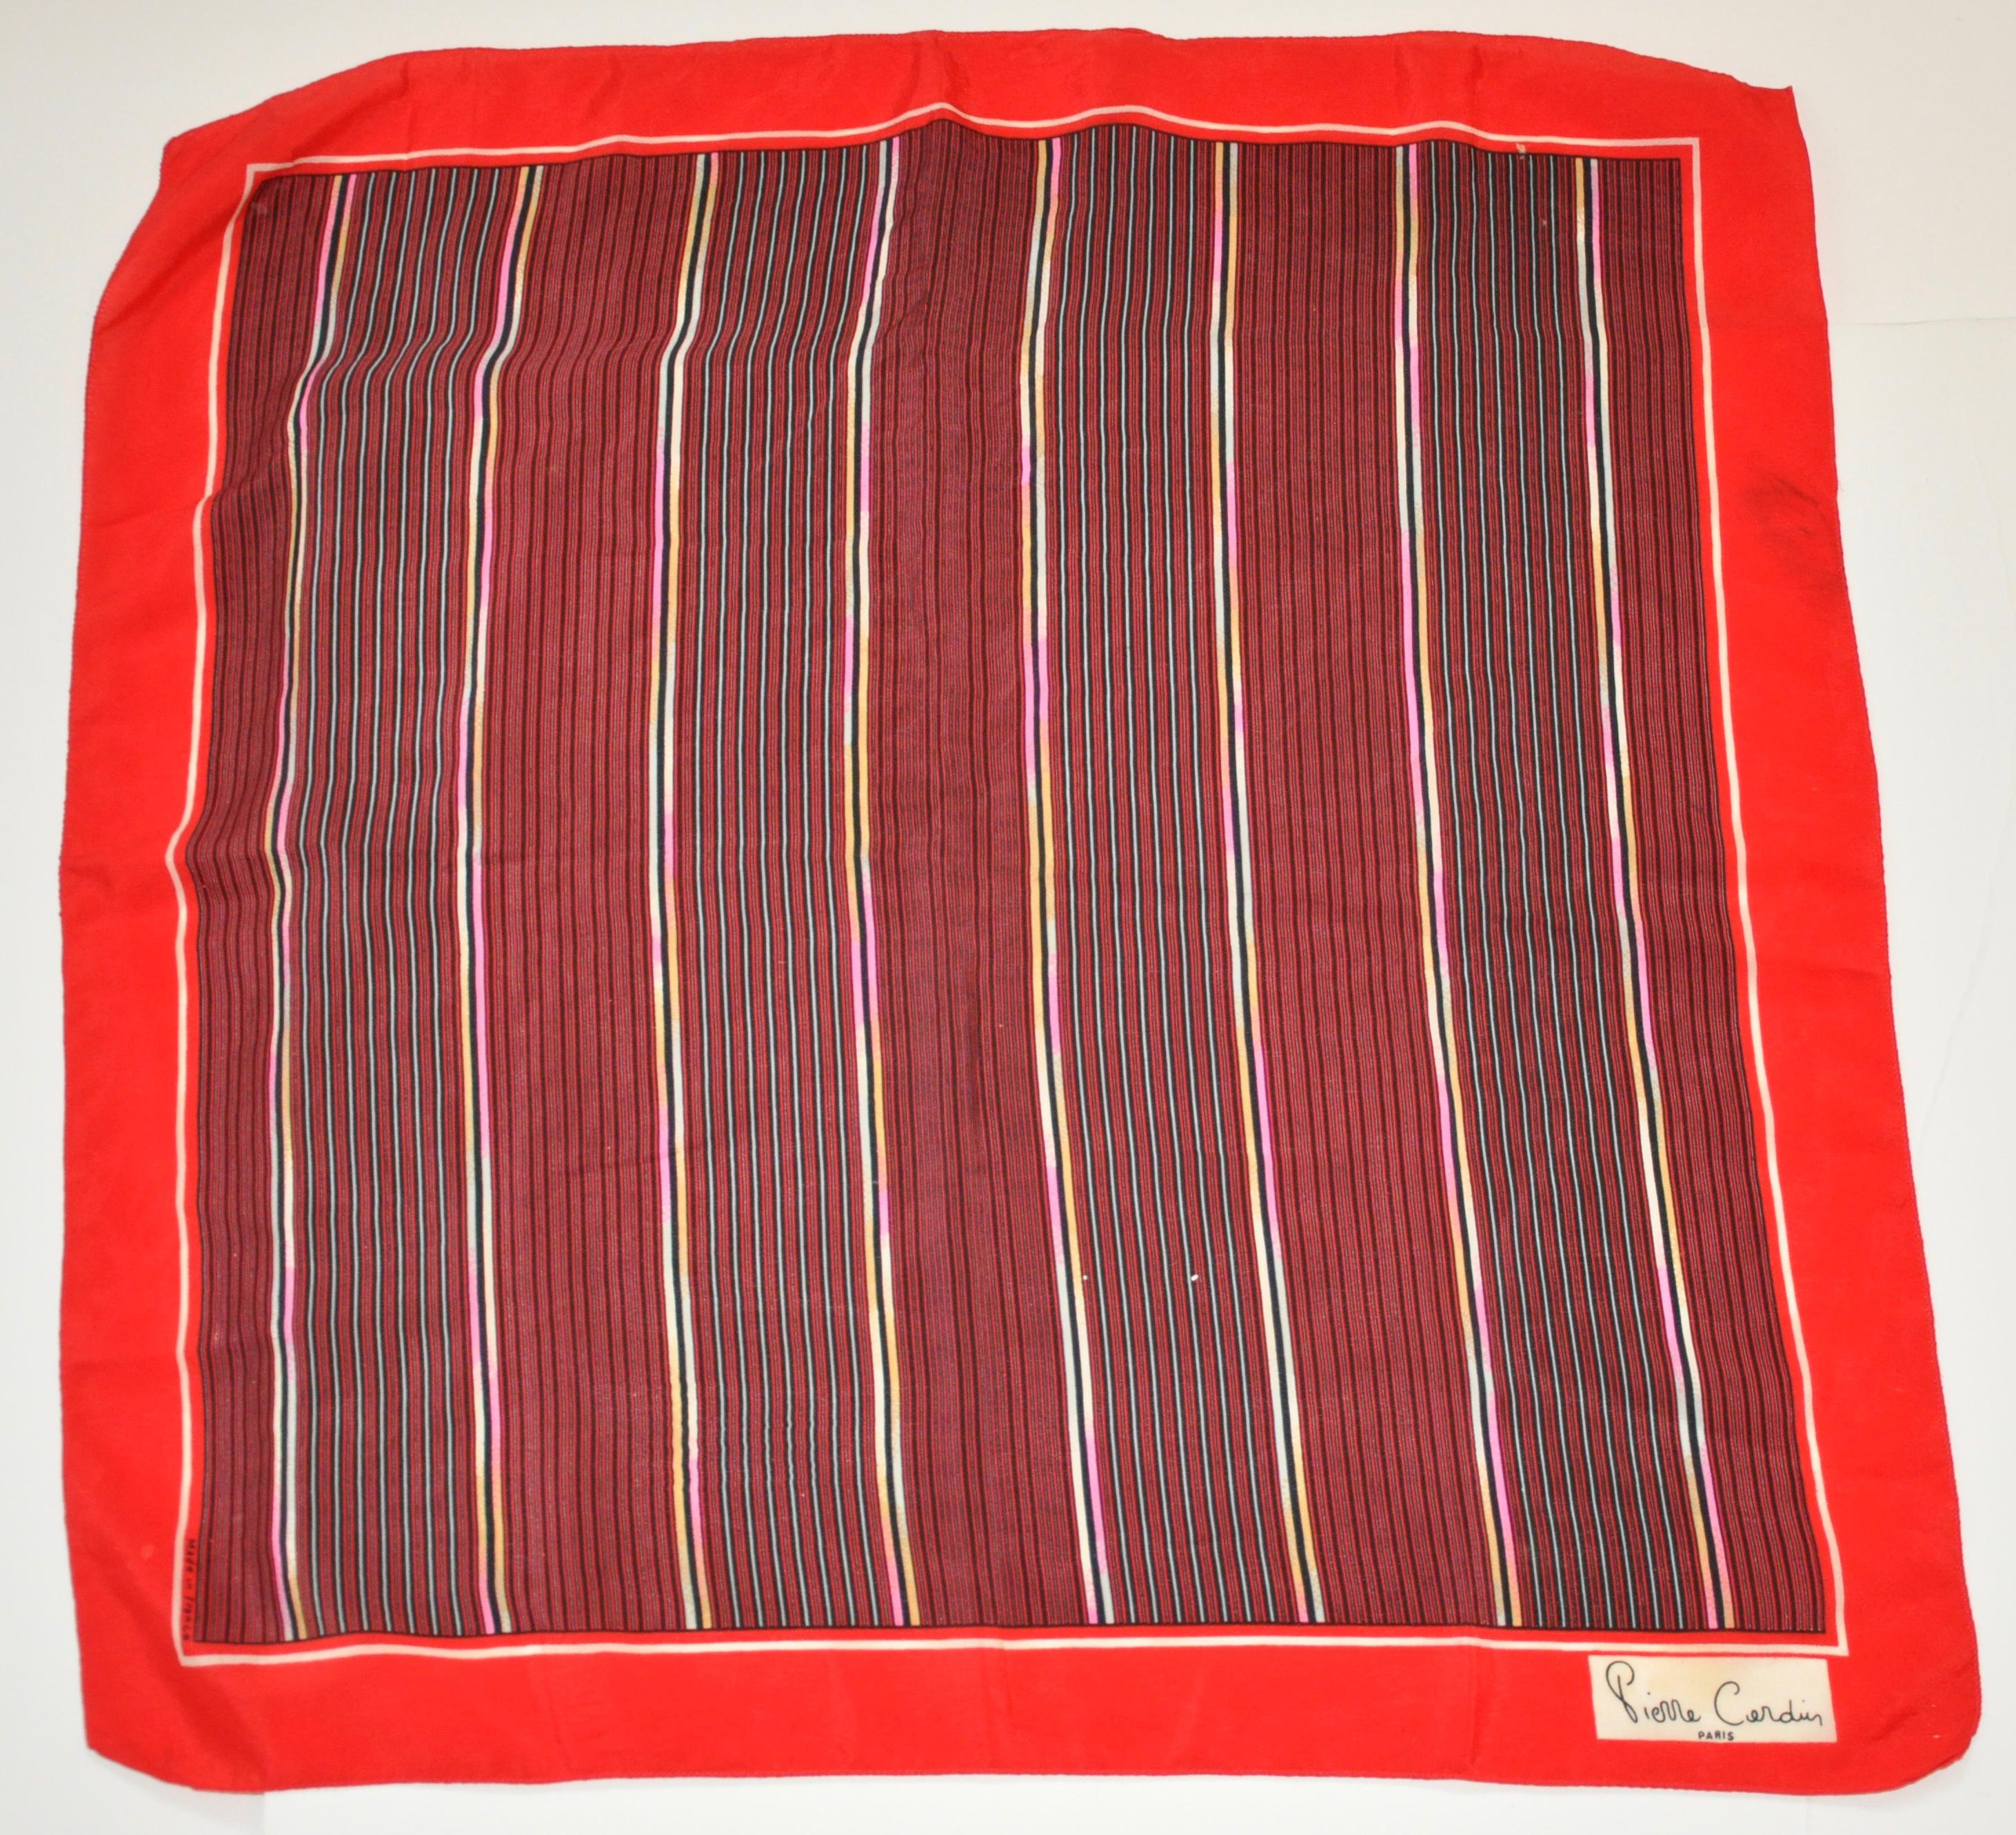        Pierre Cardin silk scarf with red borders surrounding 